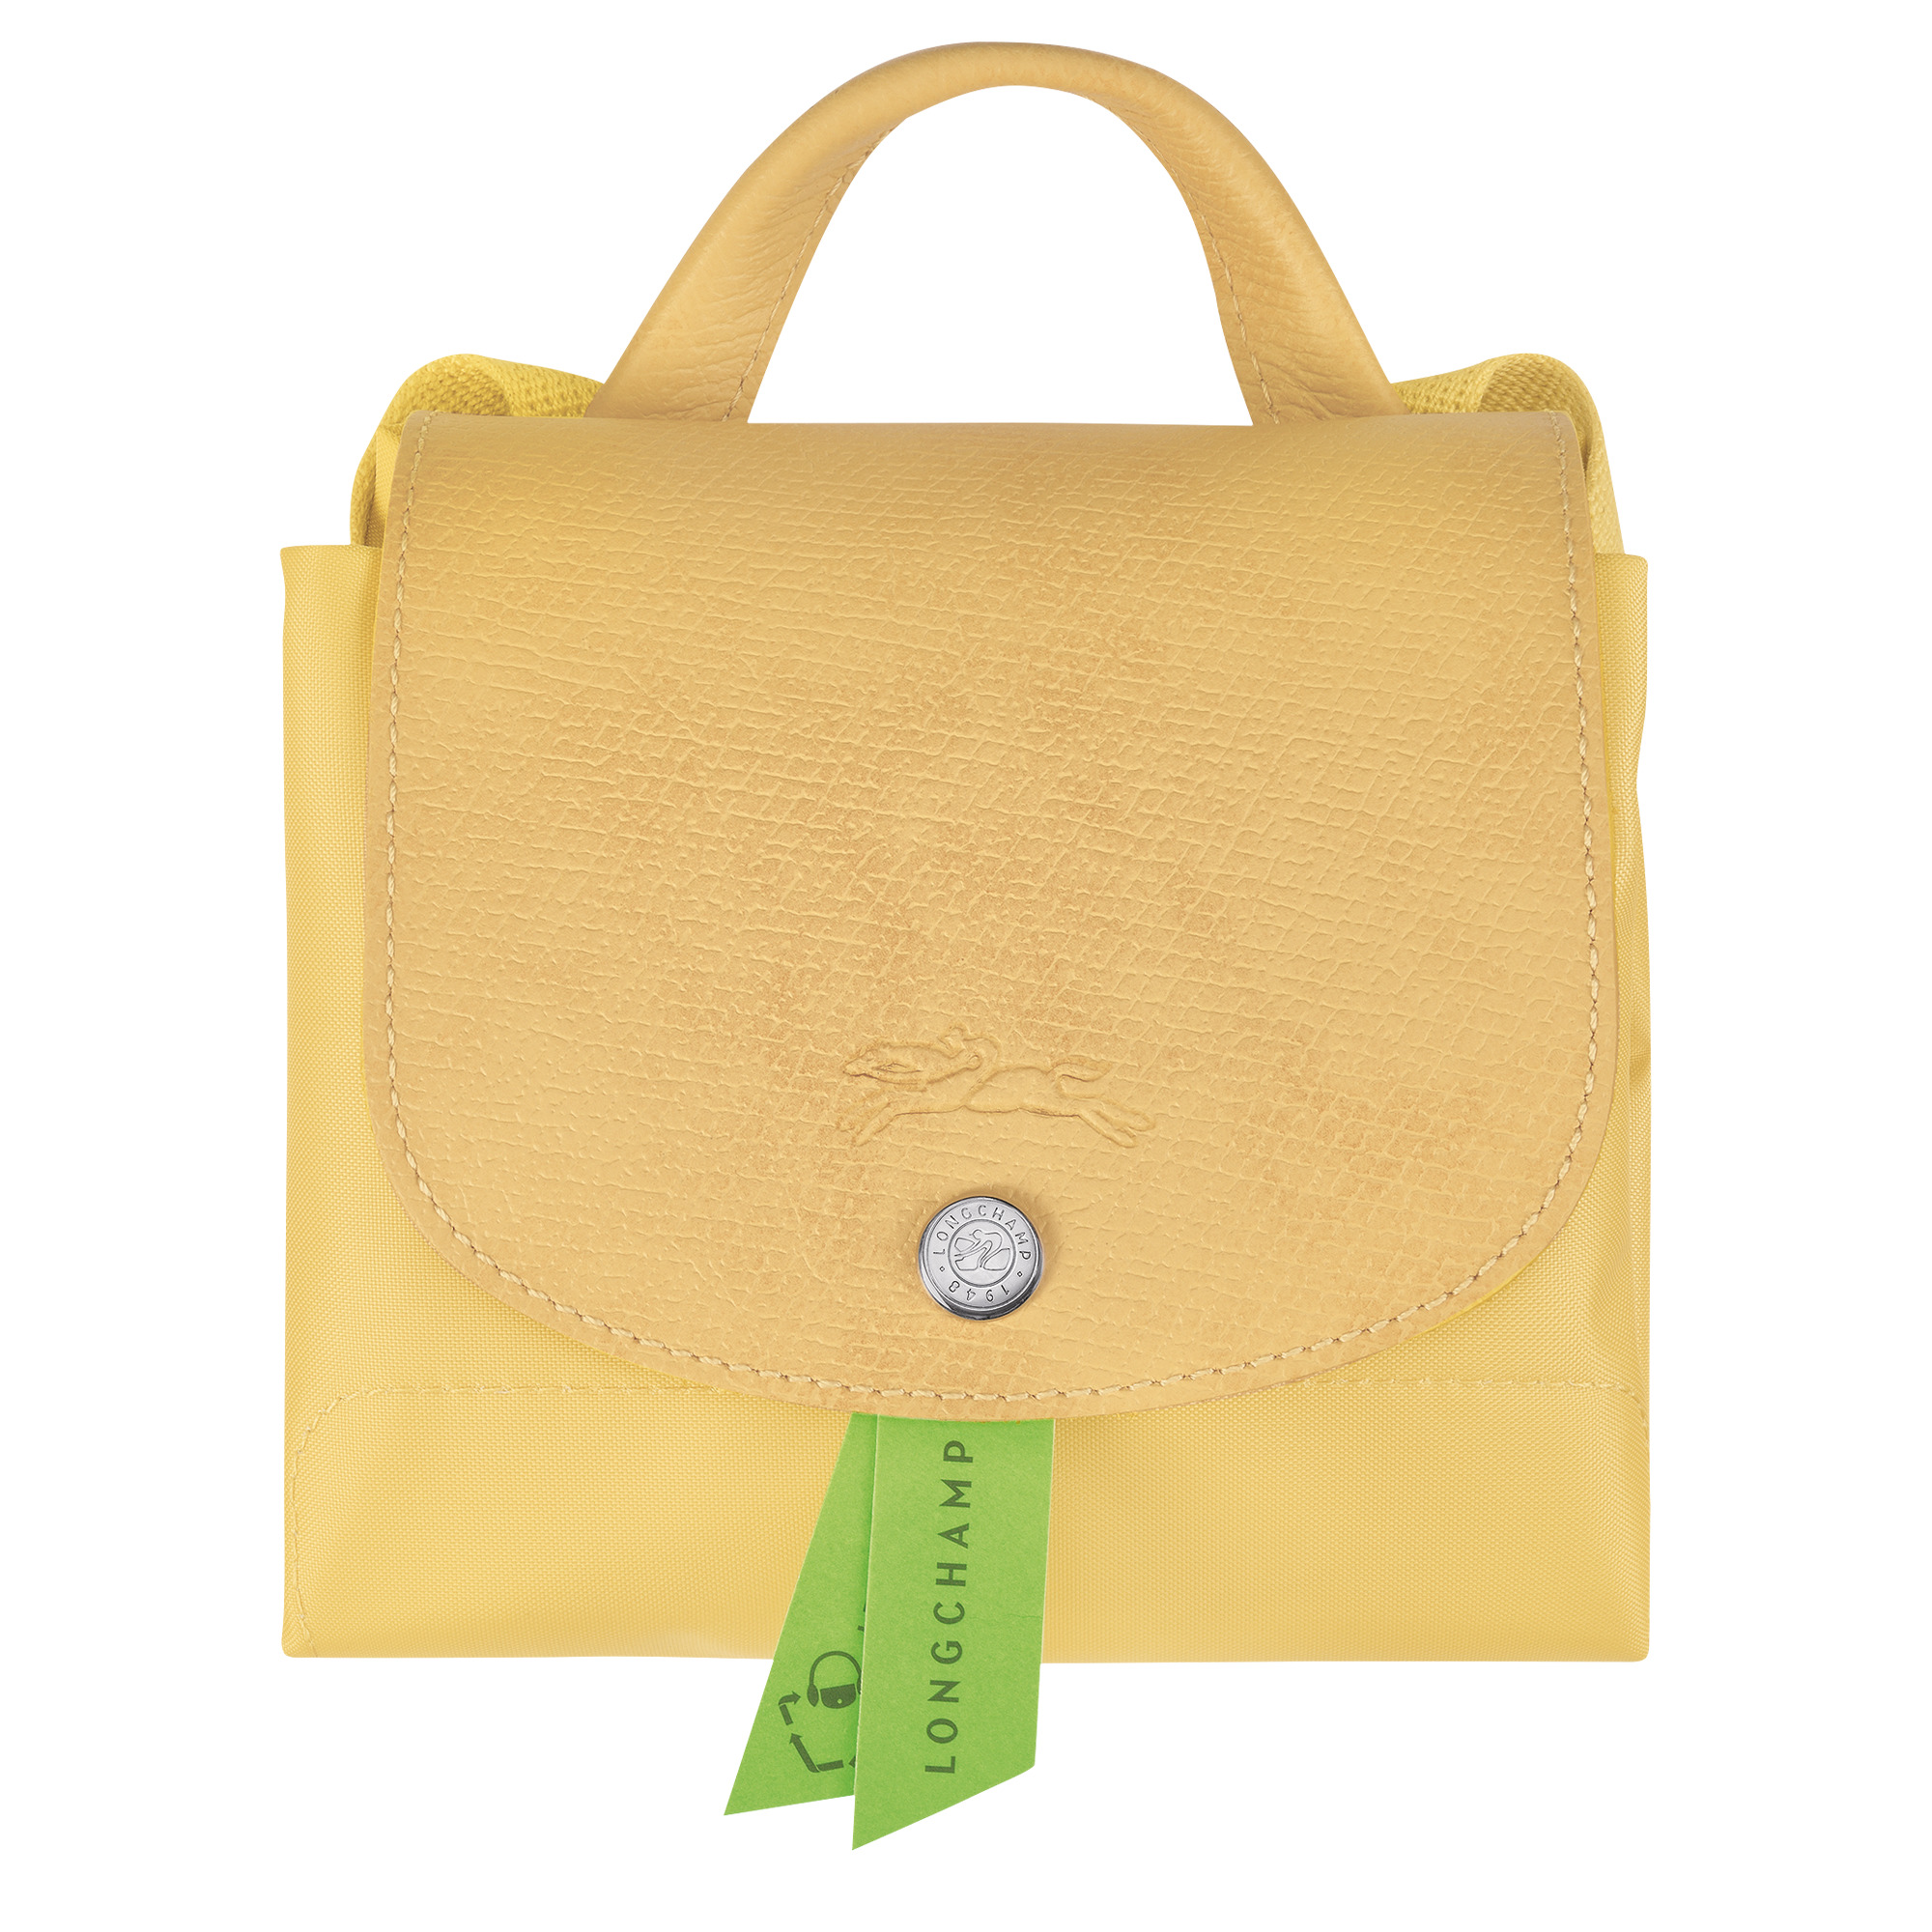 Le Pliage Green Backpack Wheat - Recycled canvas - 4